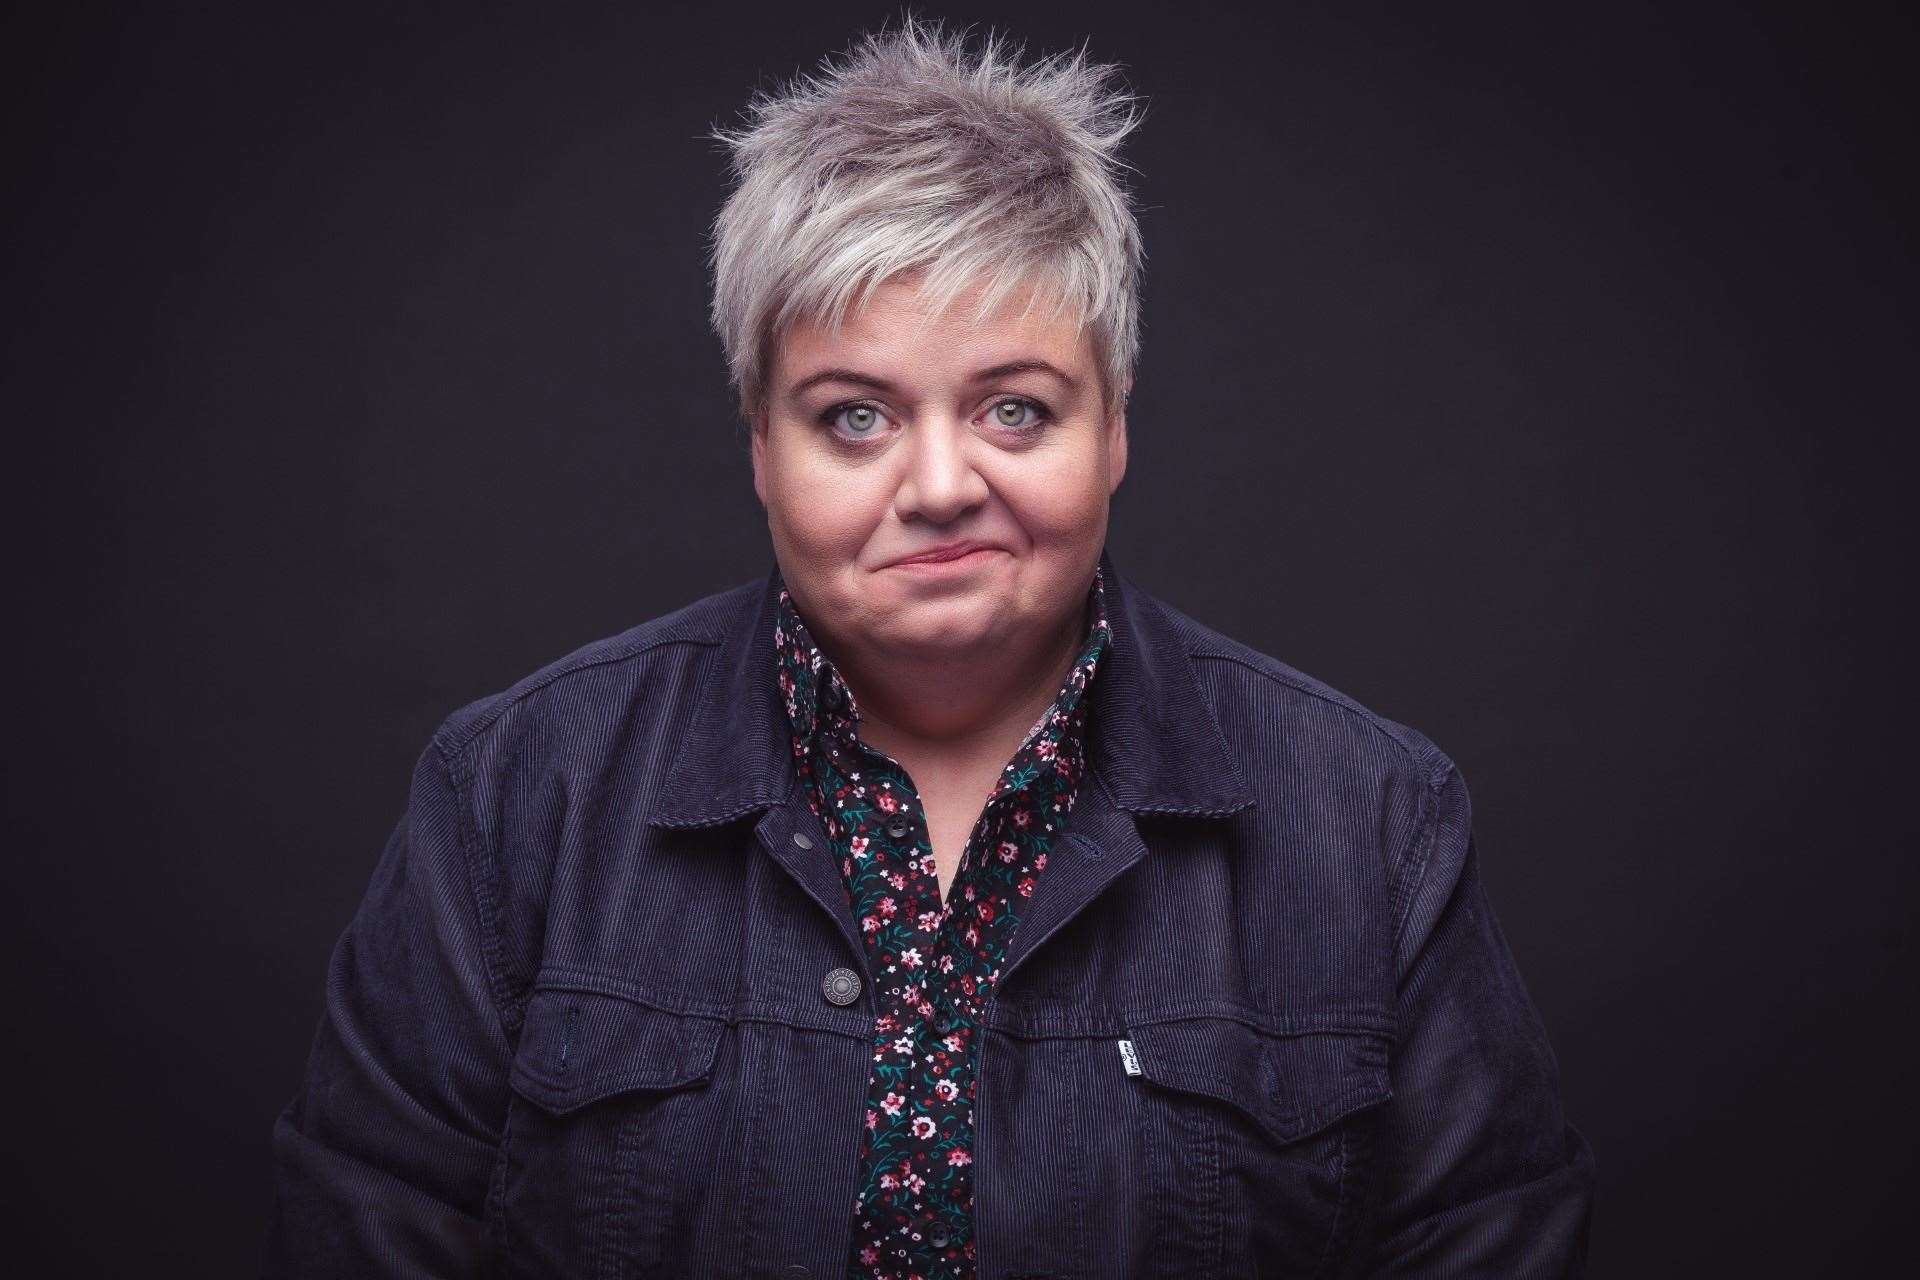 Comedian Susie McCabe, will be joining Scottish Council for Development and Industry (SCDI) at the Highlands and Islands Business Excellence Awards.